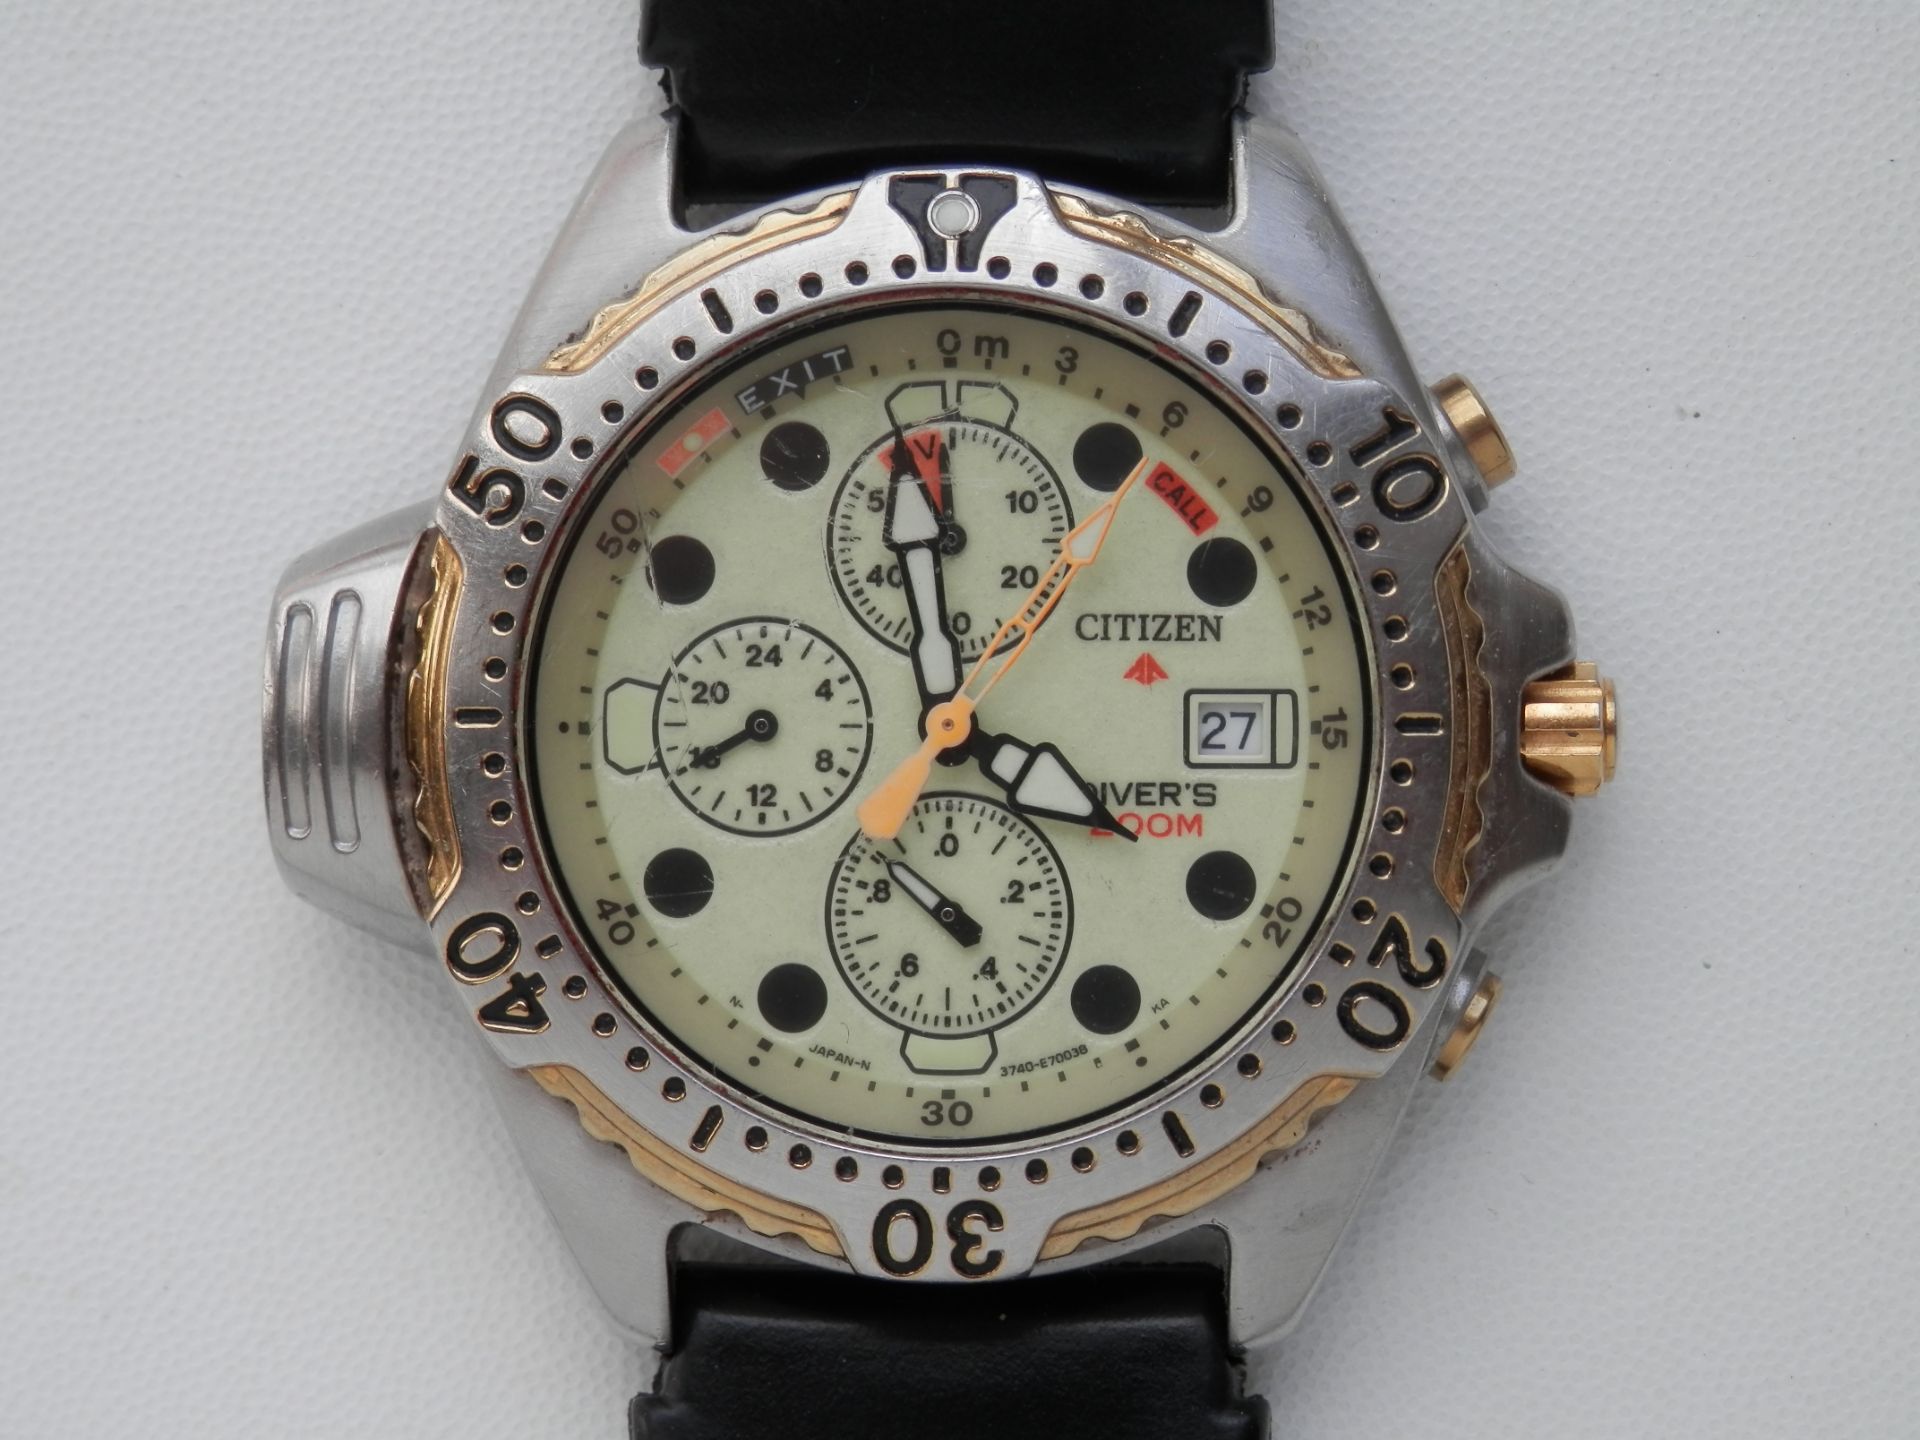 RARE GENTS CITIZEN PROMASTER LUME 3740 DEPTH METER STAINLESS RETRO DATE WATCH - Image 2 of 12